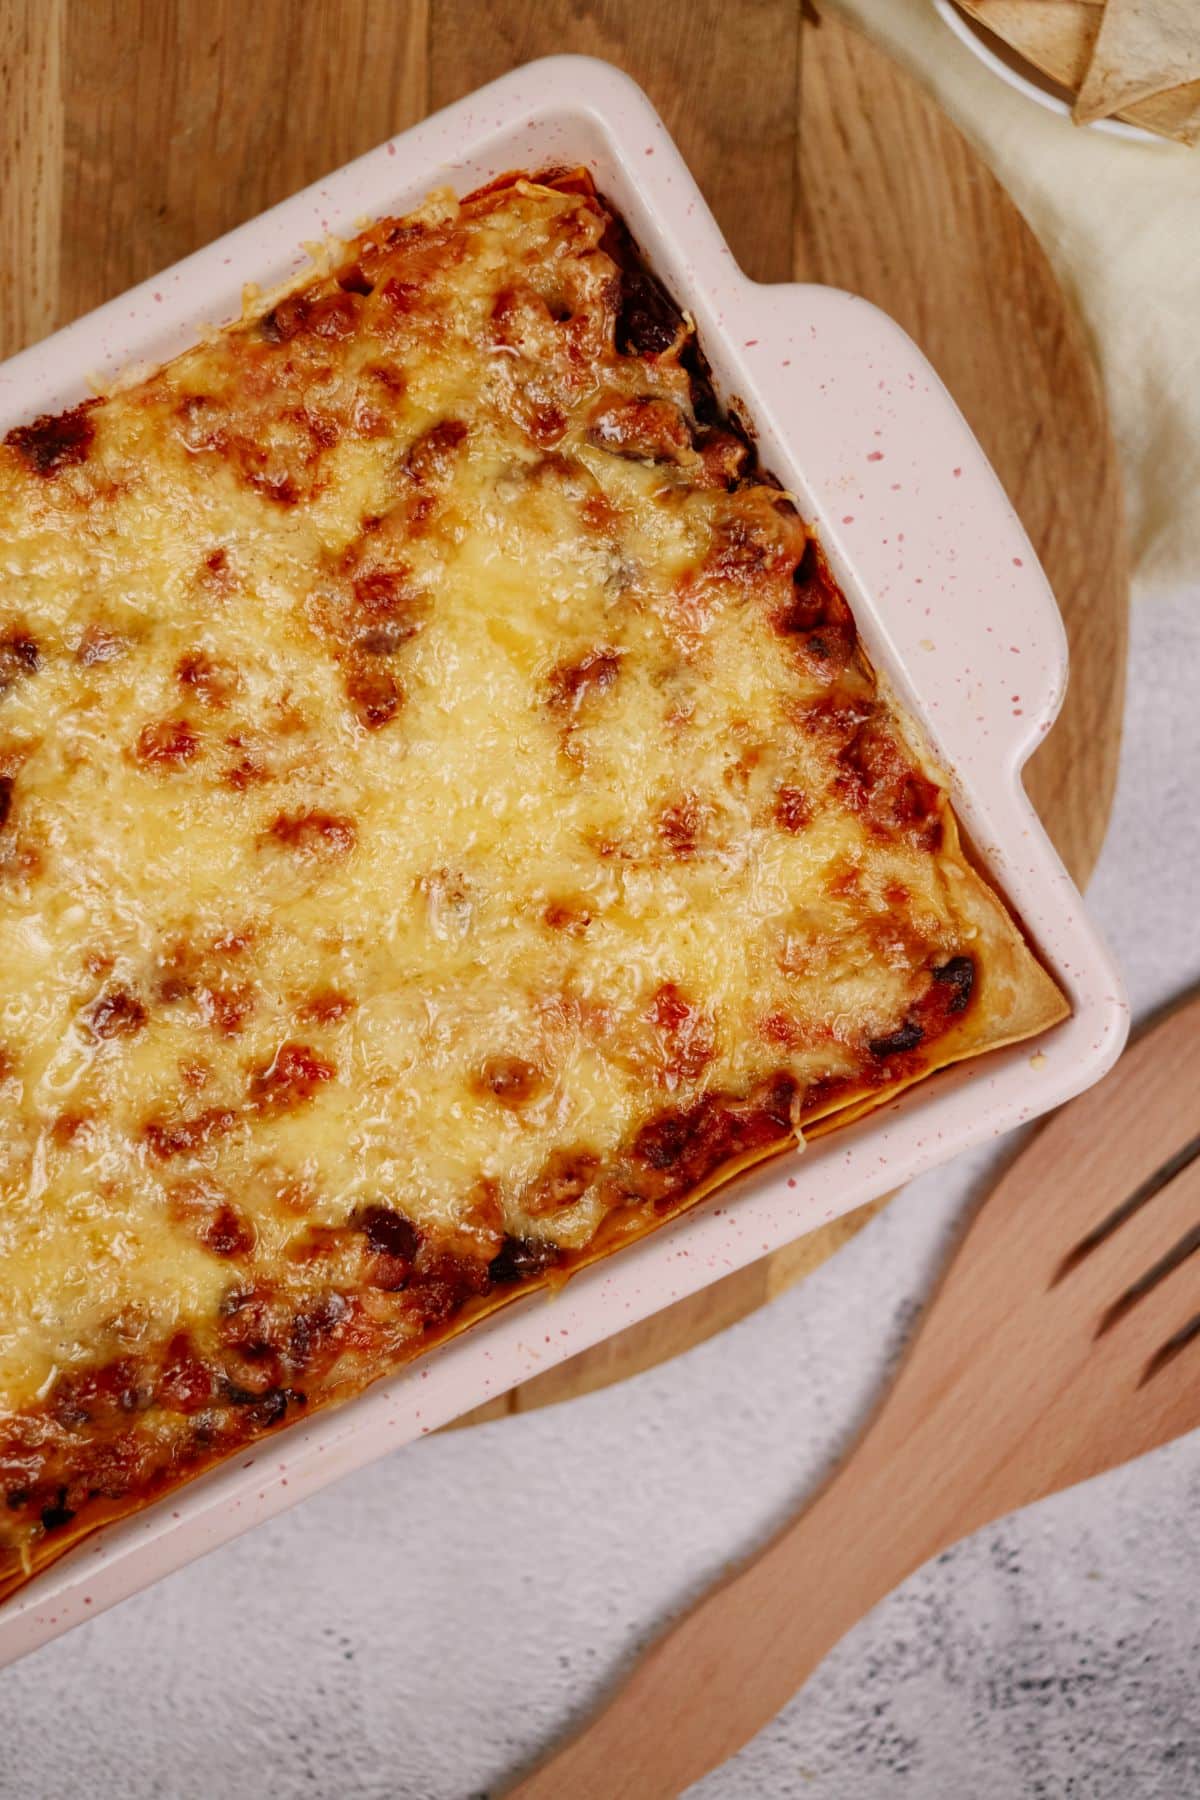 rectangular white casserole dish filled and topped with cheese laying by wooden spoon